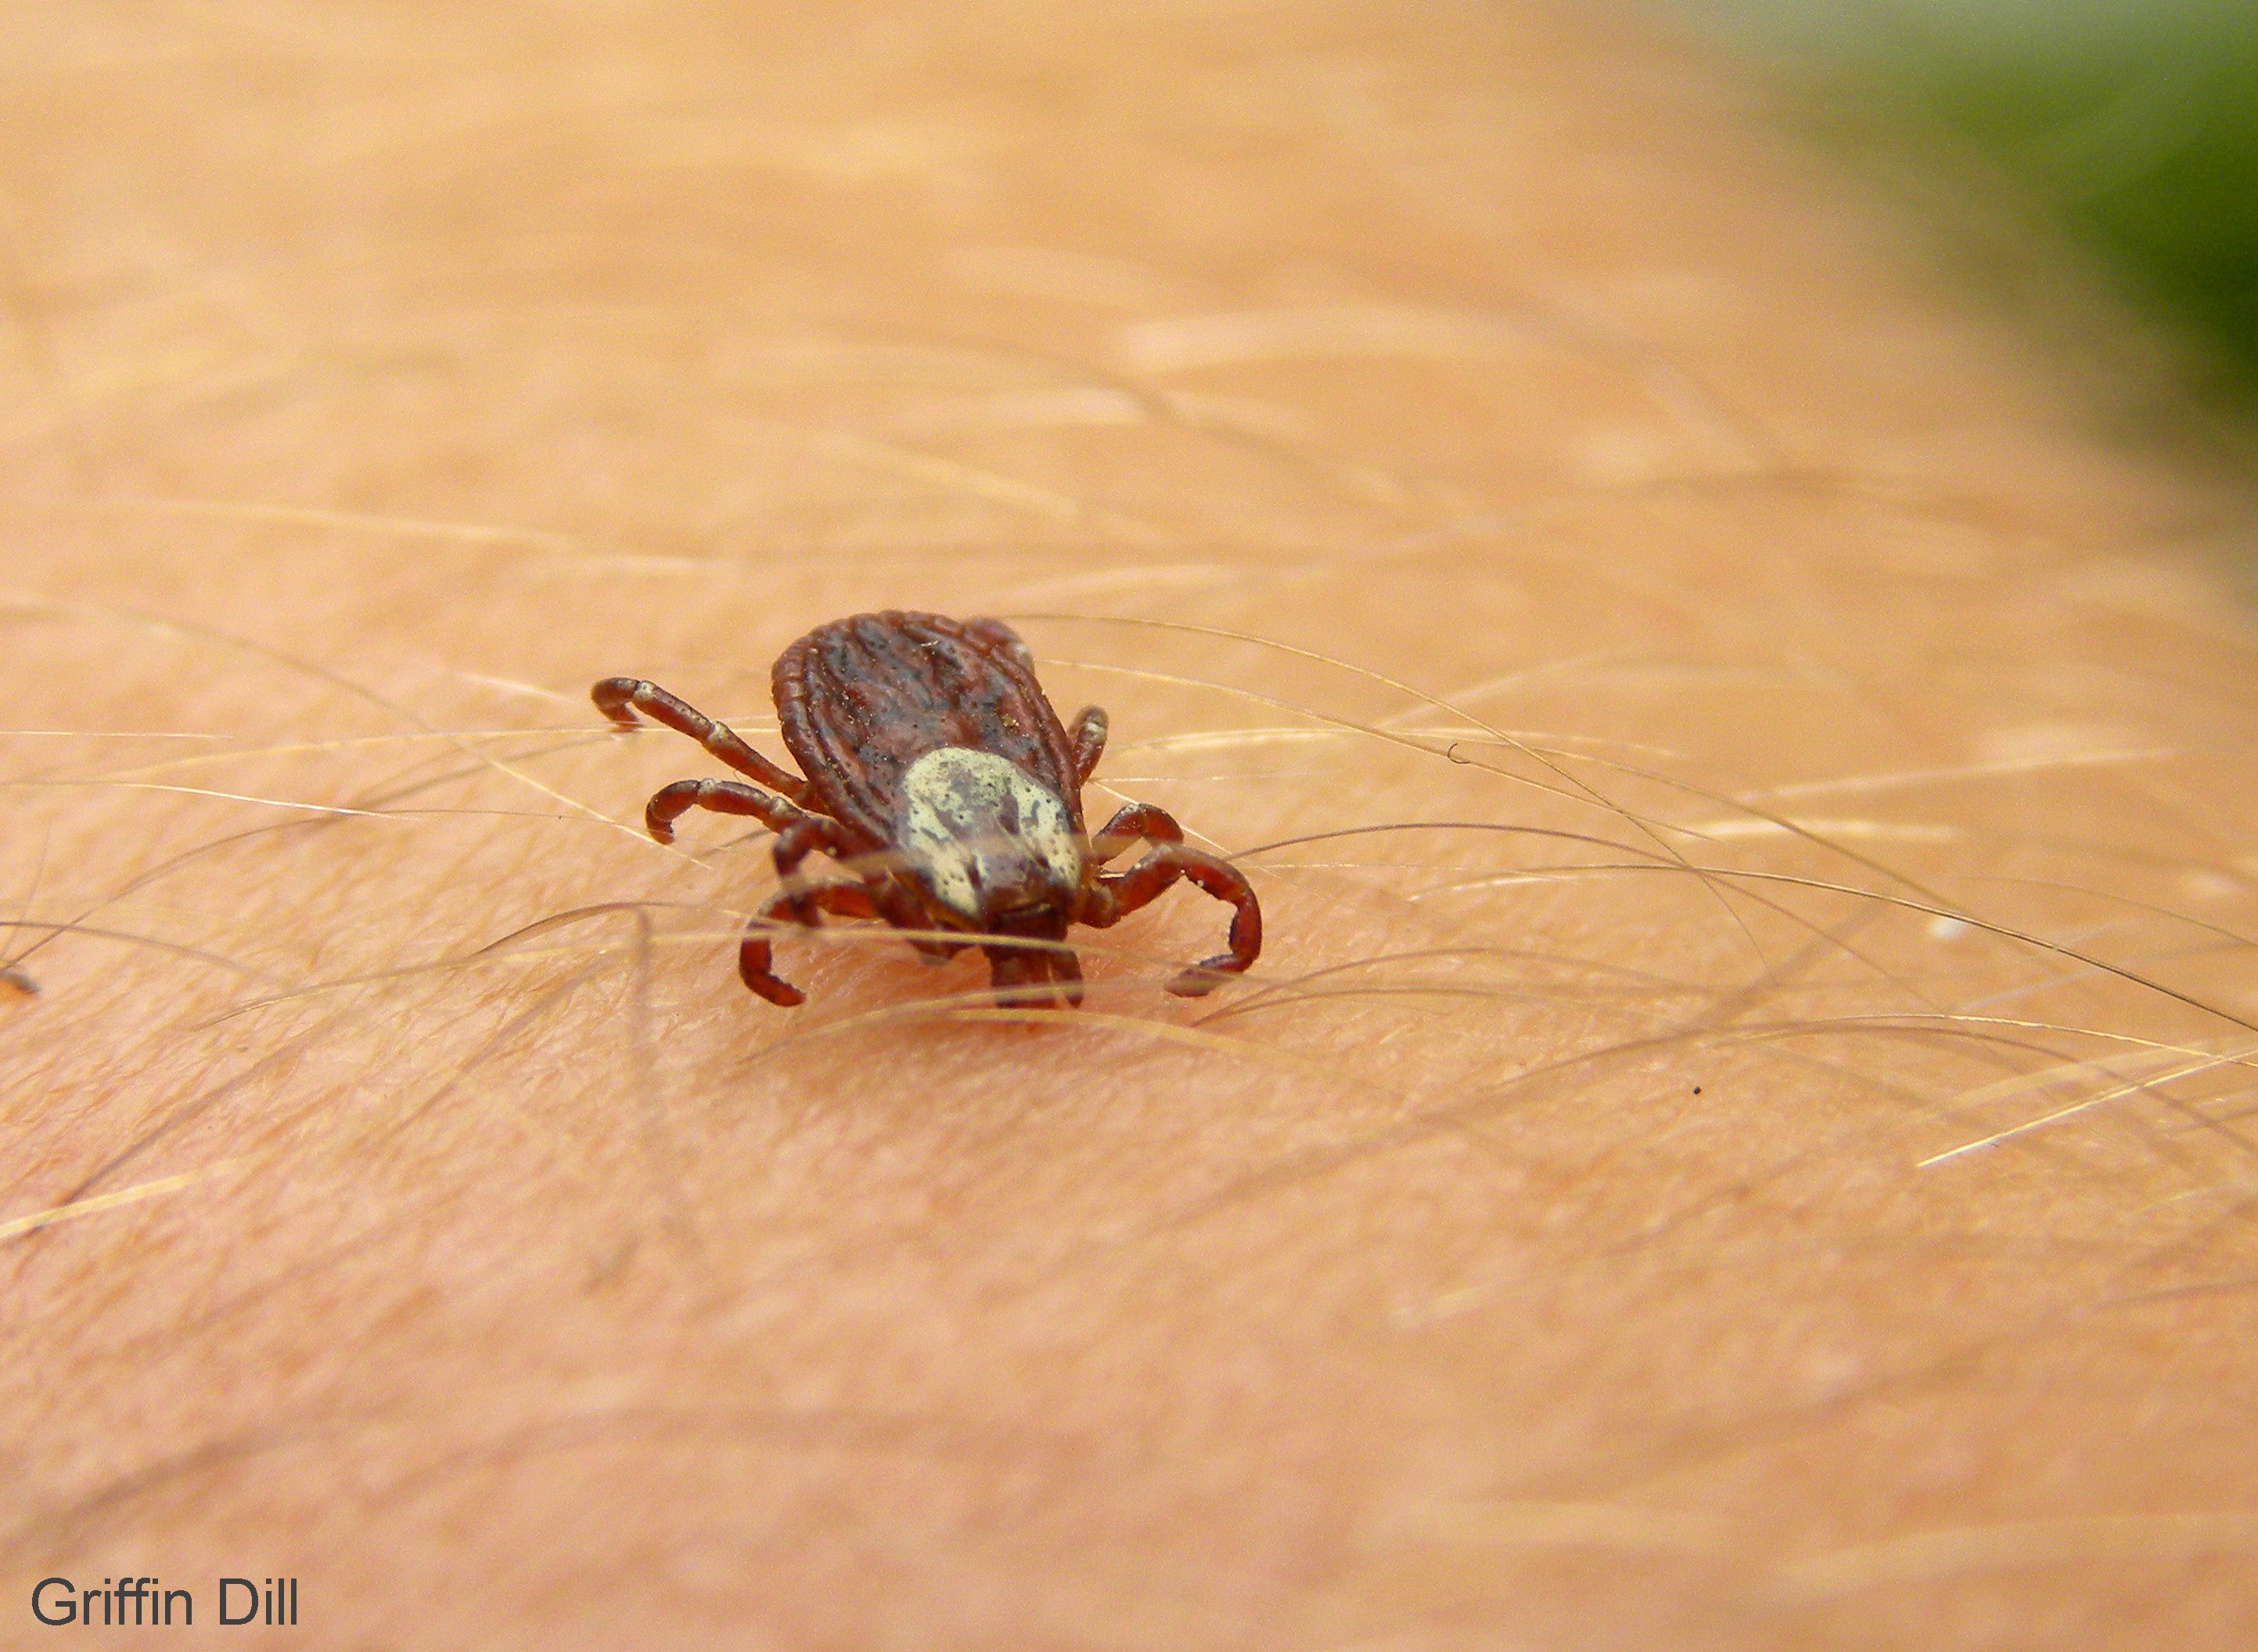 Tick Photos | UMaine Cooperative Extension: Insect Pests, Ticks and ...